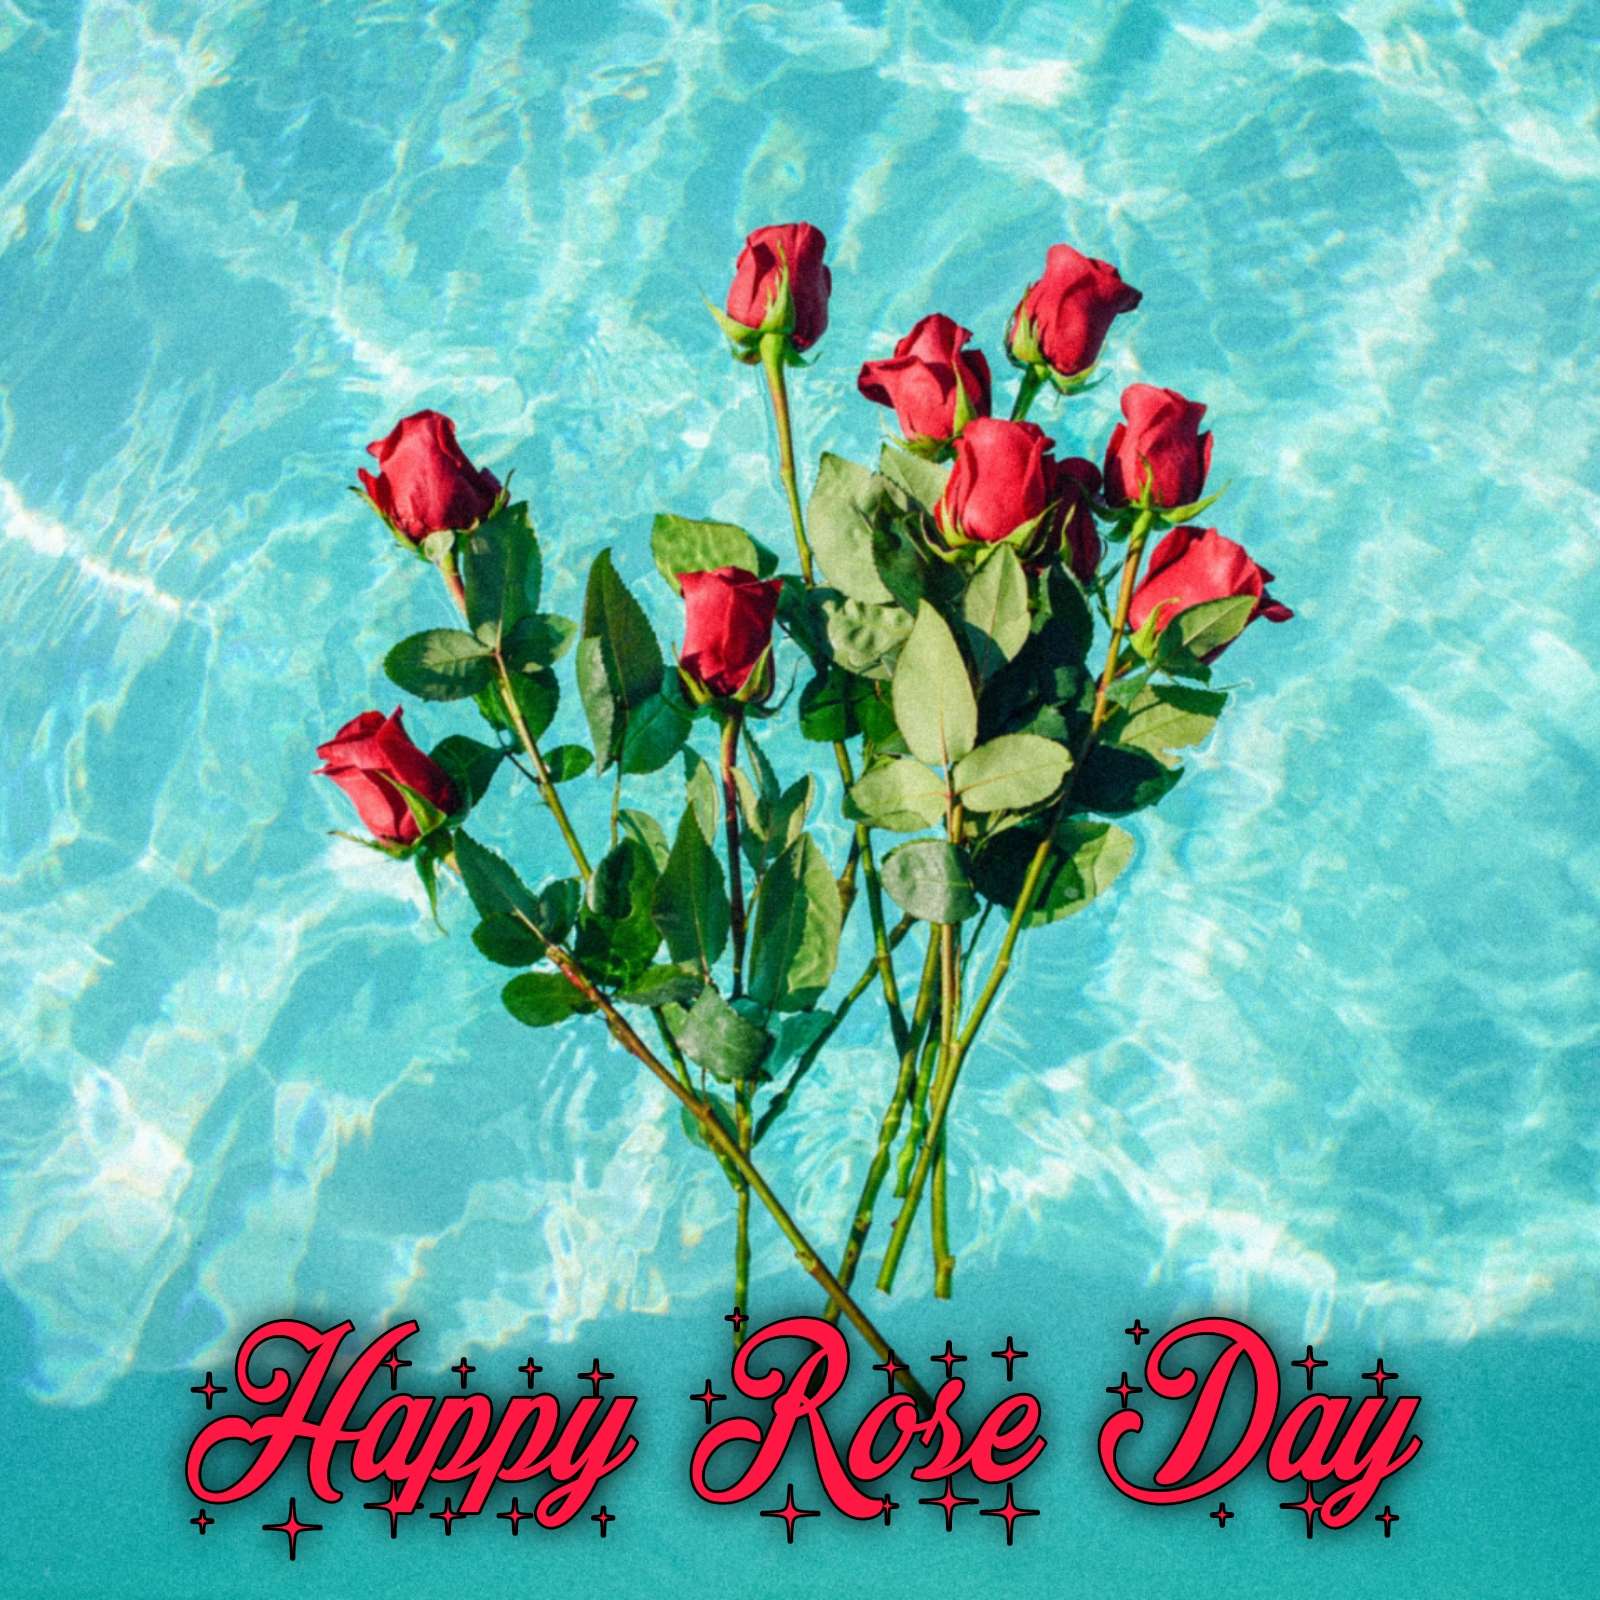 Happy Rose Day Images for WhatsApp & Facebook DP